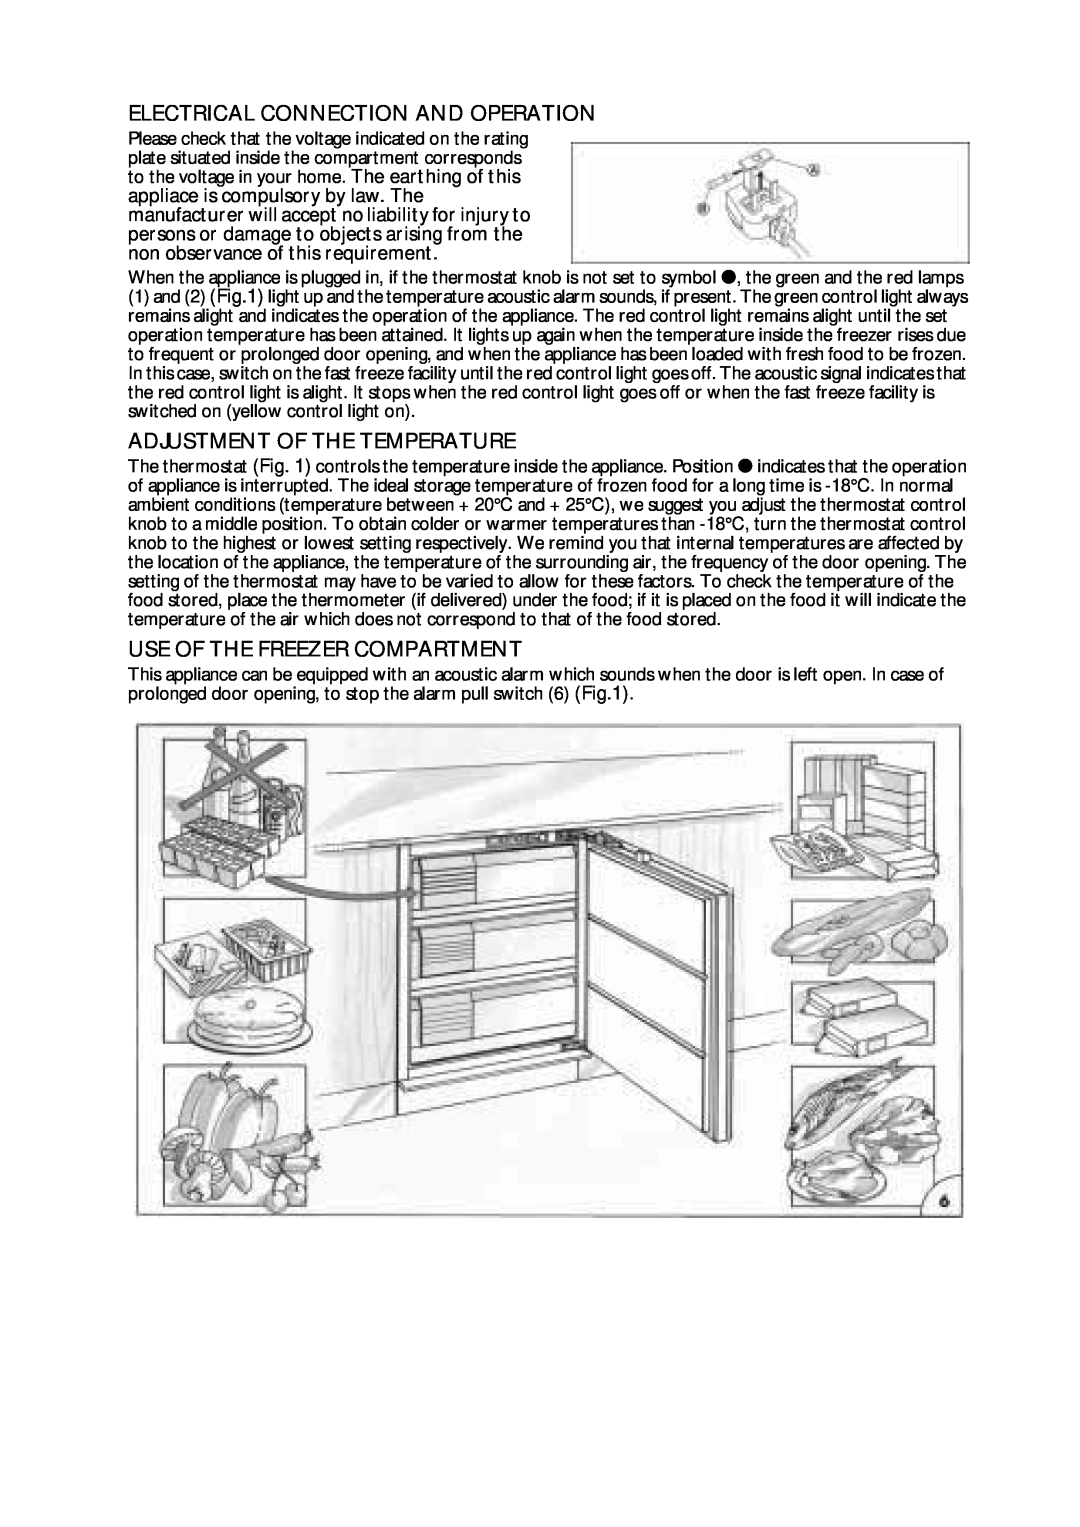 CDA FW380 manual Electrical Connection And Operation, Adjustment Of The Temperature, Use Of The Freezer Compartment 